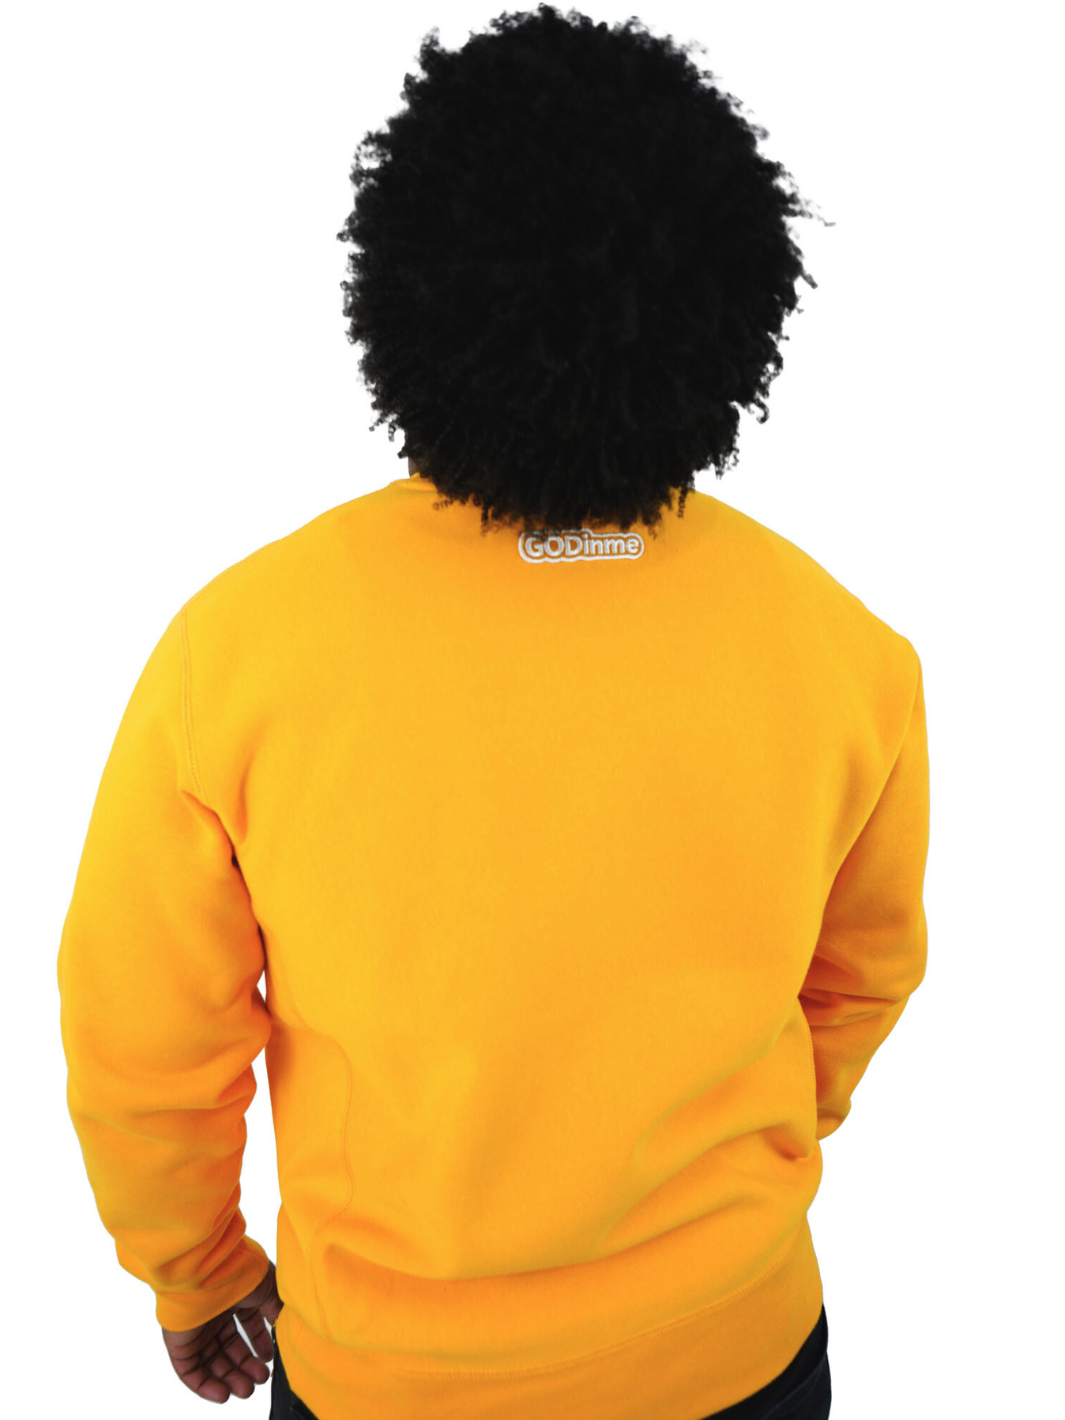 Luxury Gold Crewneck with premium cross grain design to ensure long-lasting comfort and wear. Featuring logo at left front and GODinme on the back.